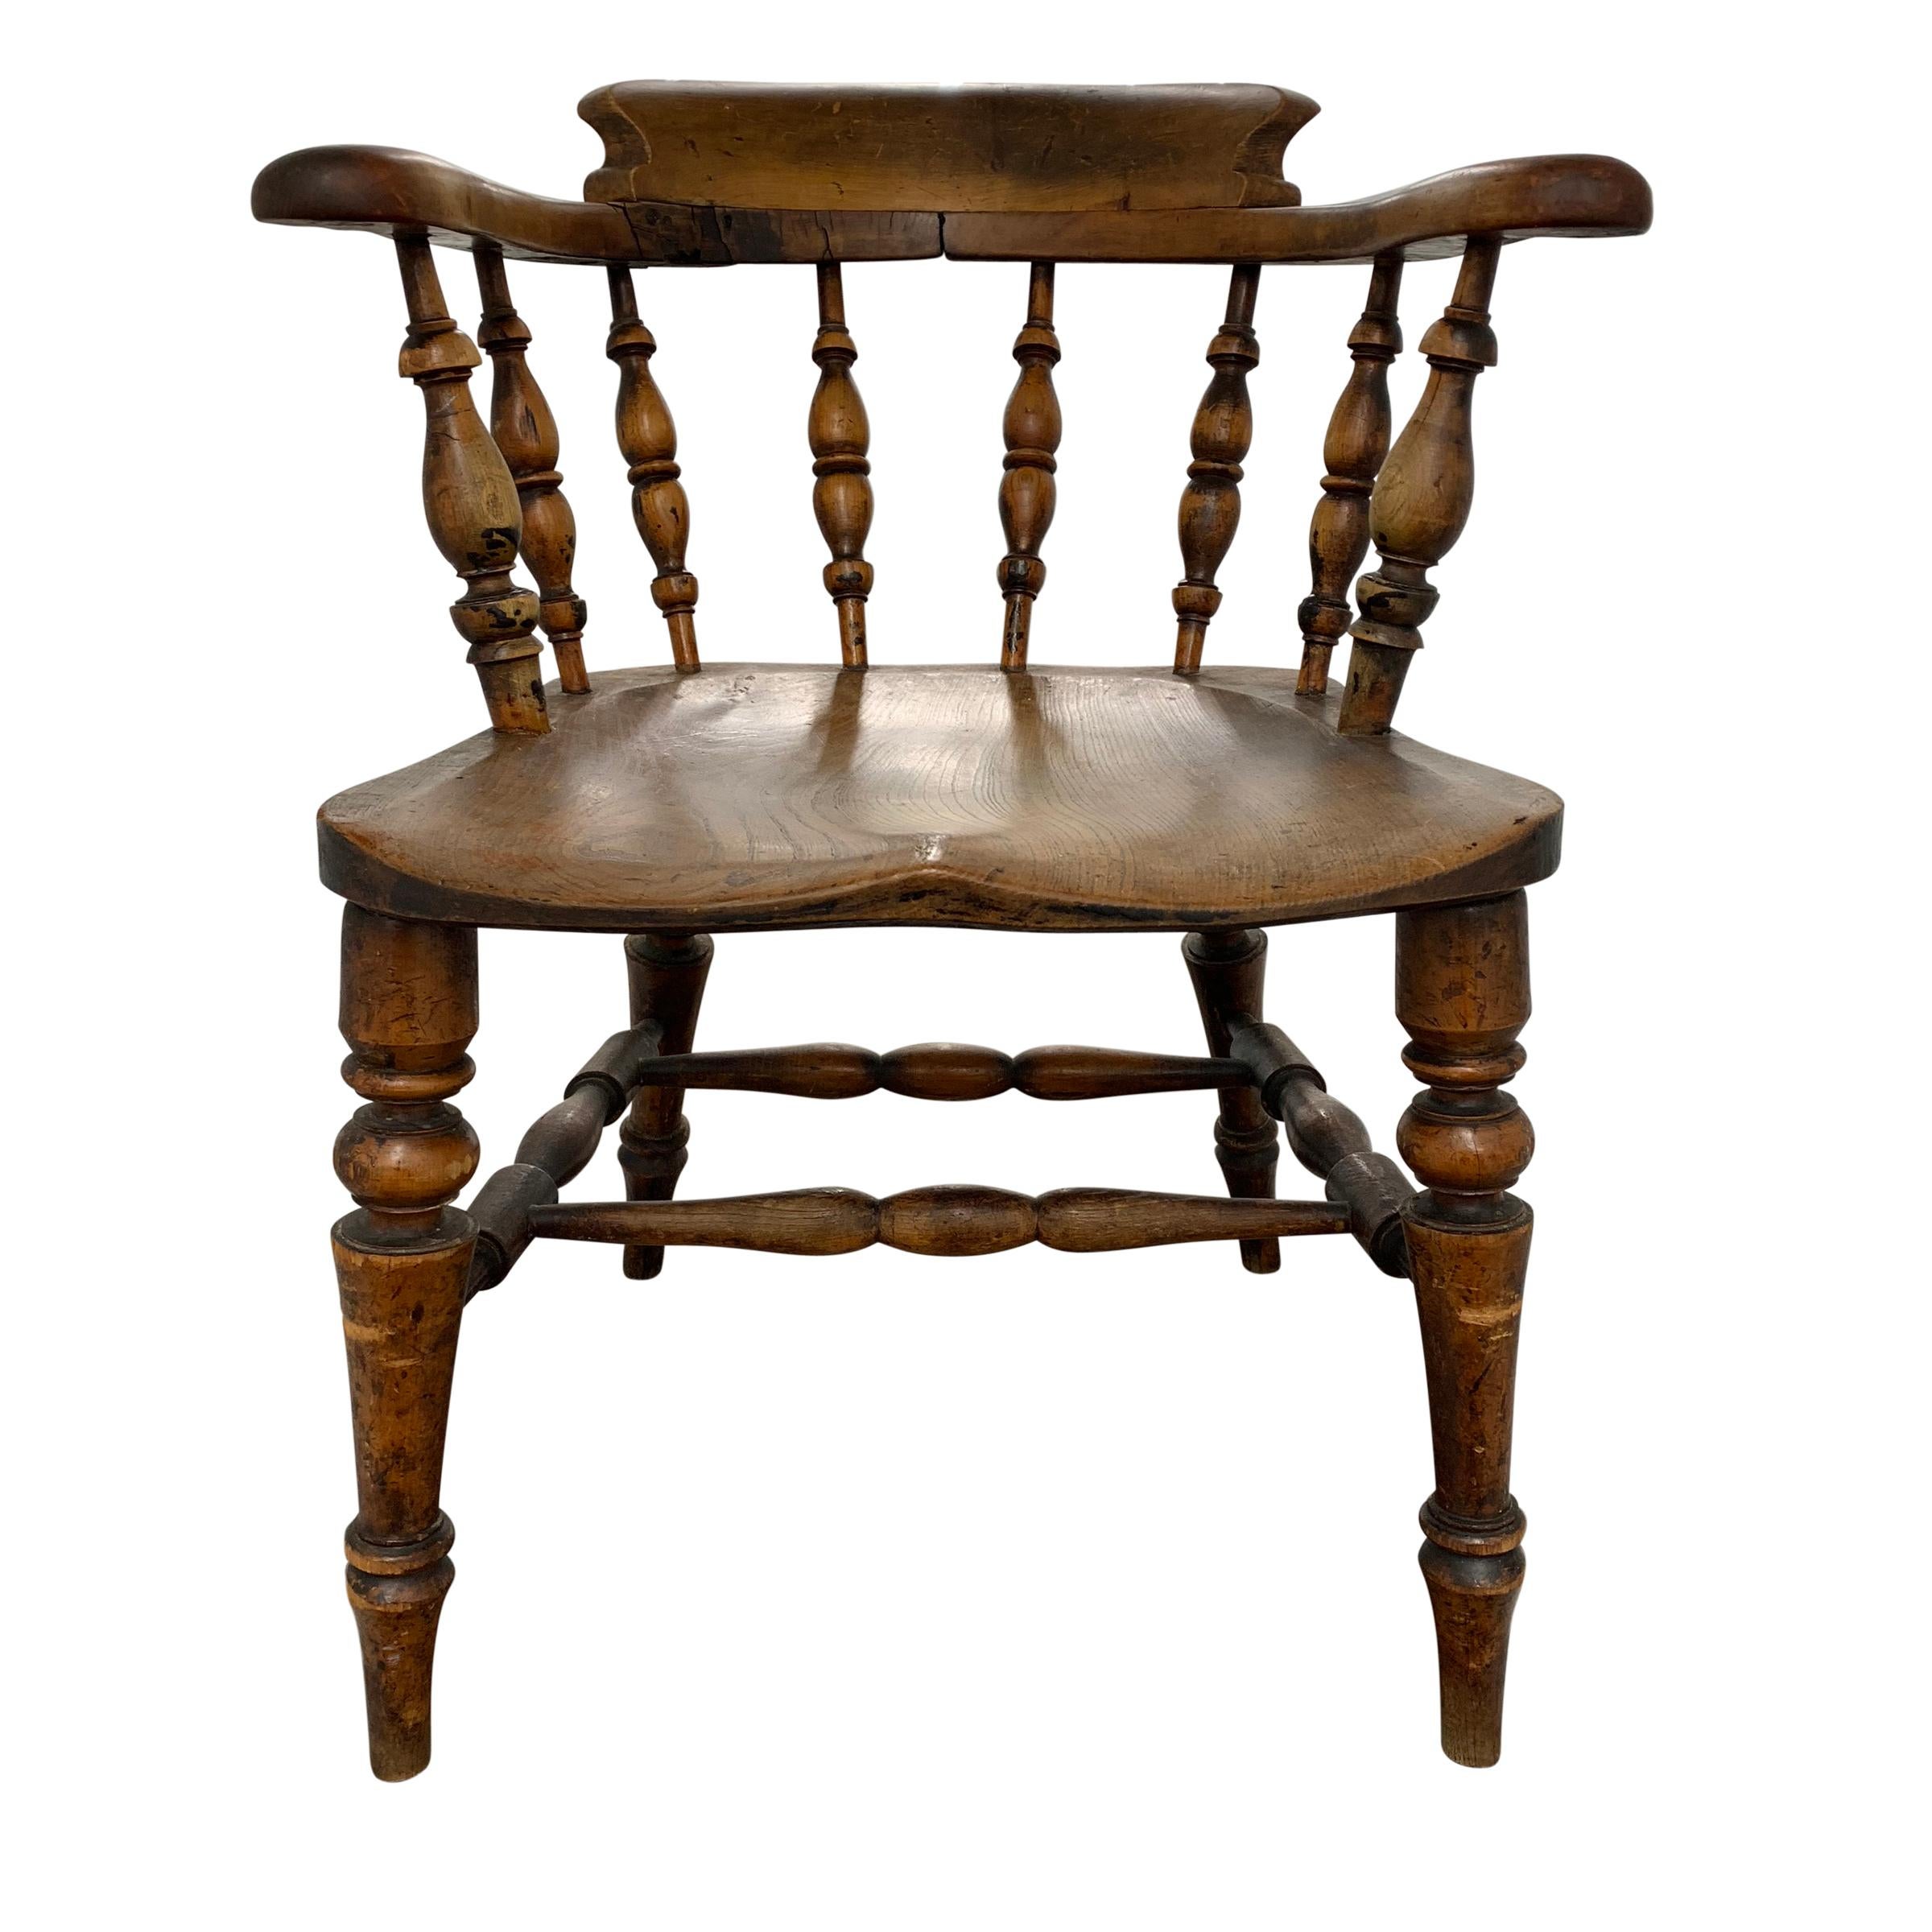 An incredible set of two almost matching 19th century English pub chairs with beautifully turned spindles and legs, with a slight lean, and fantastic patina only time can bestow. One of the chairs has a wonderful old iron repair on the back.